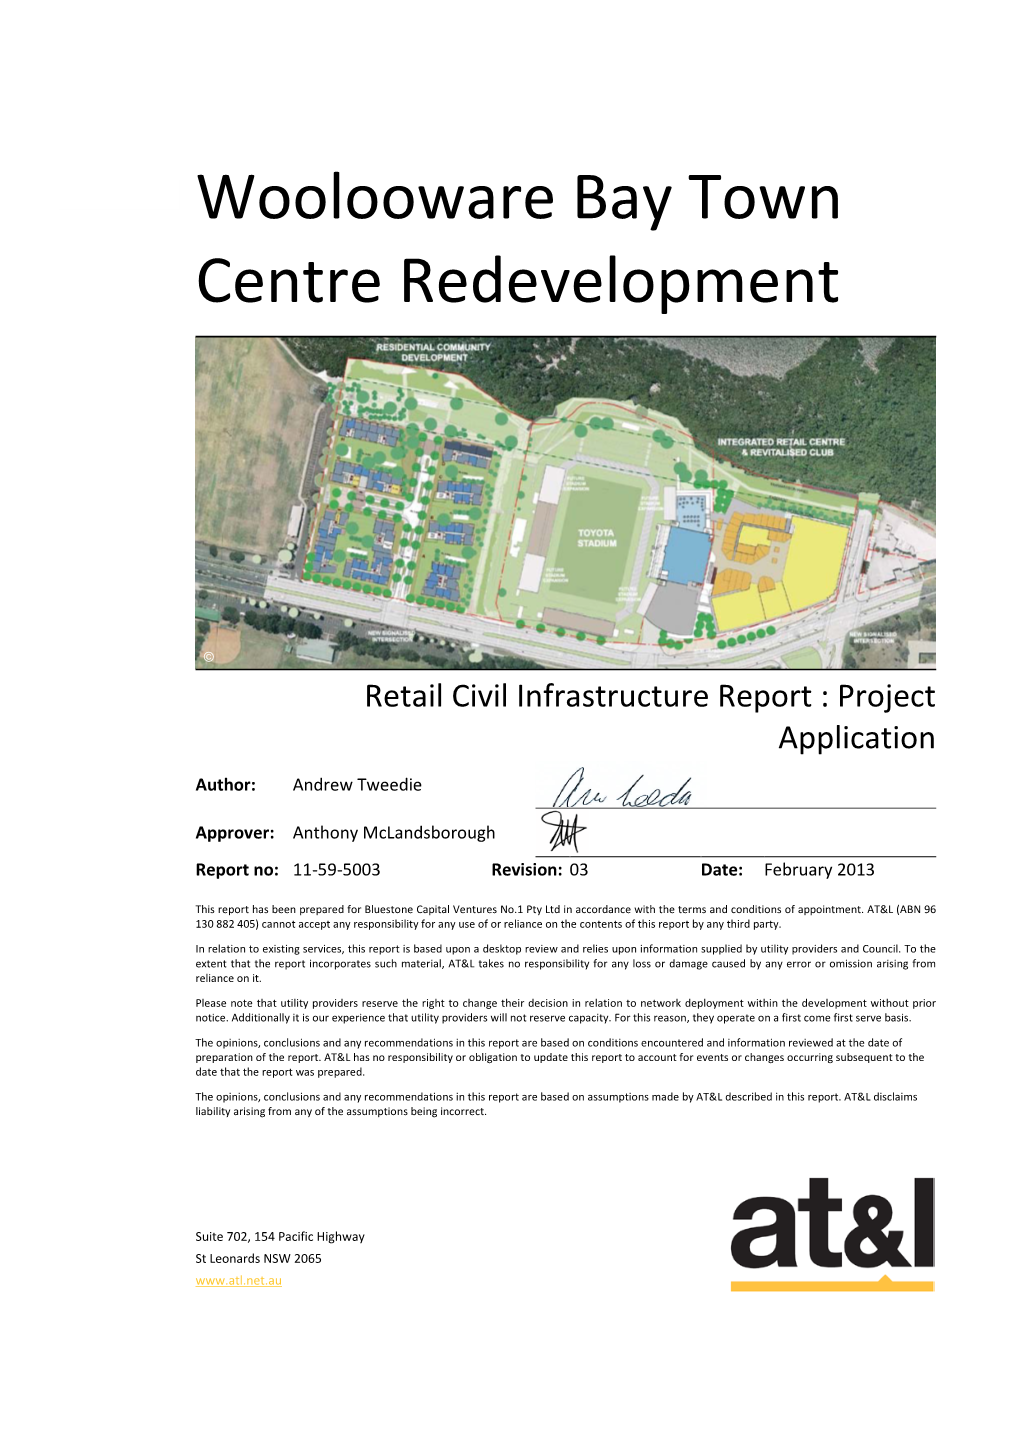 Woolooware Bay Town Centre Redevelopment